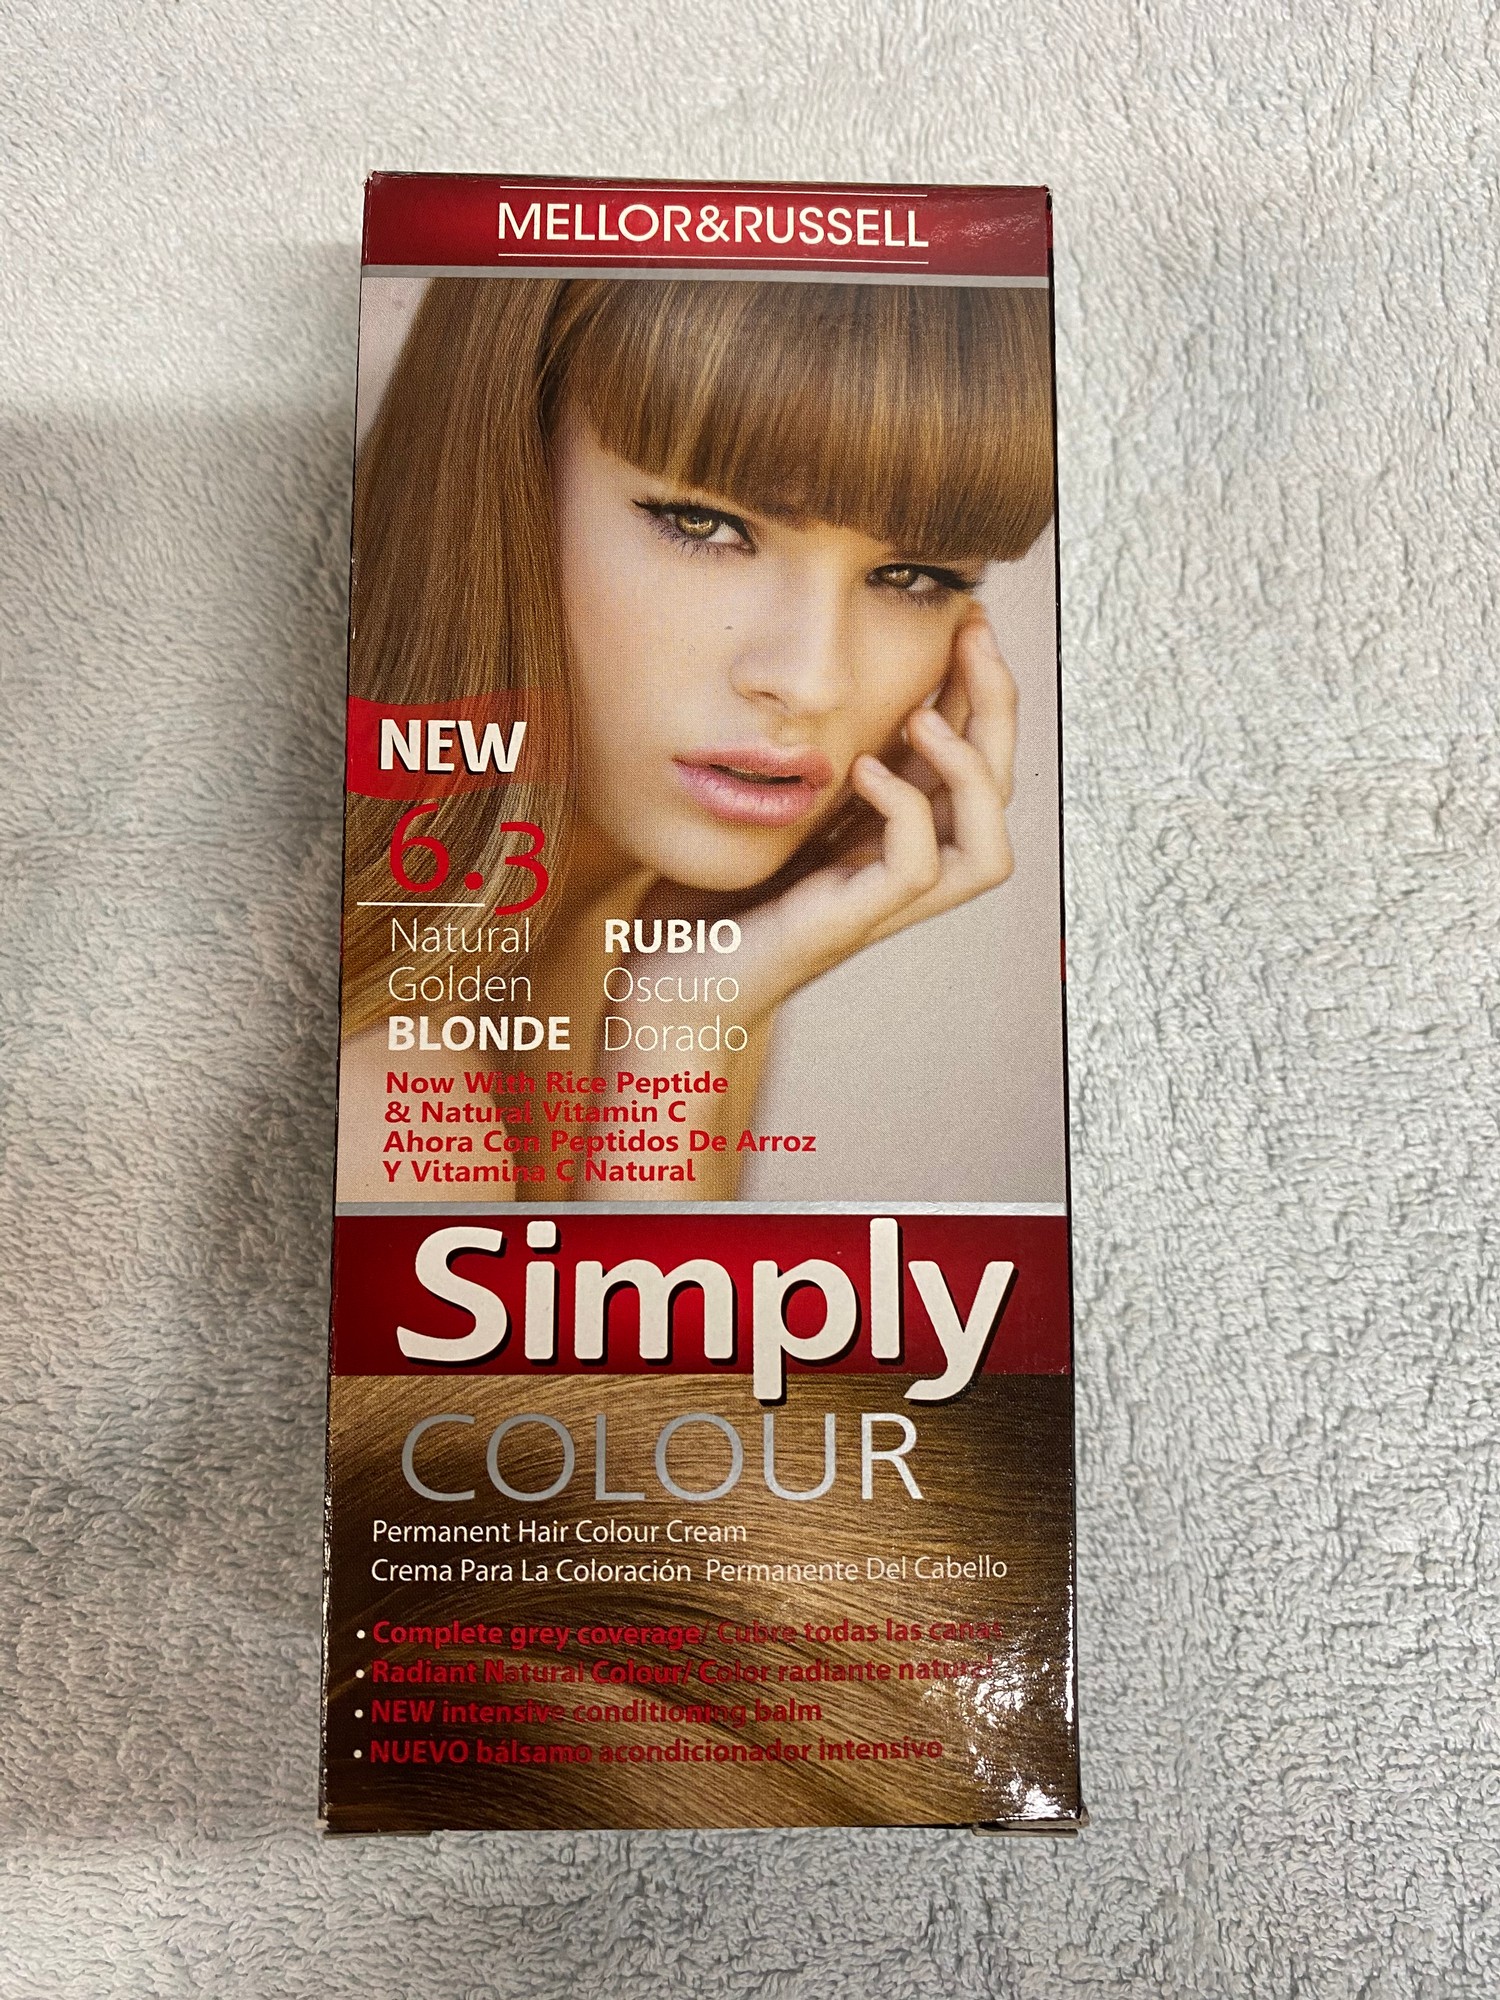 12 Mellor and russell simply bright dark golden blonde hair dye